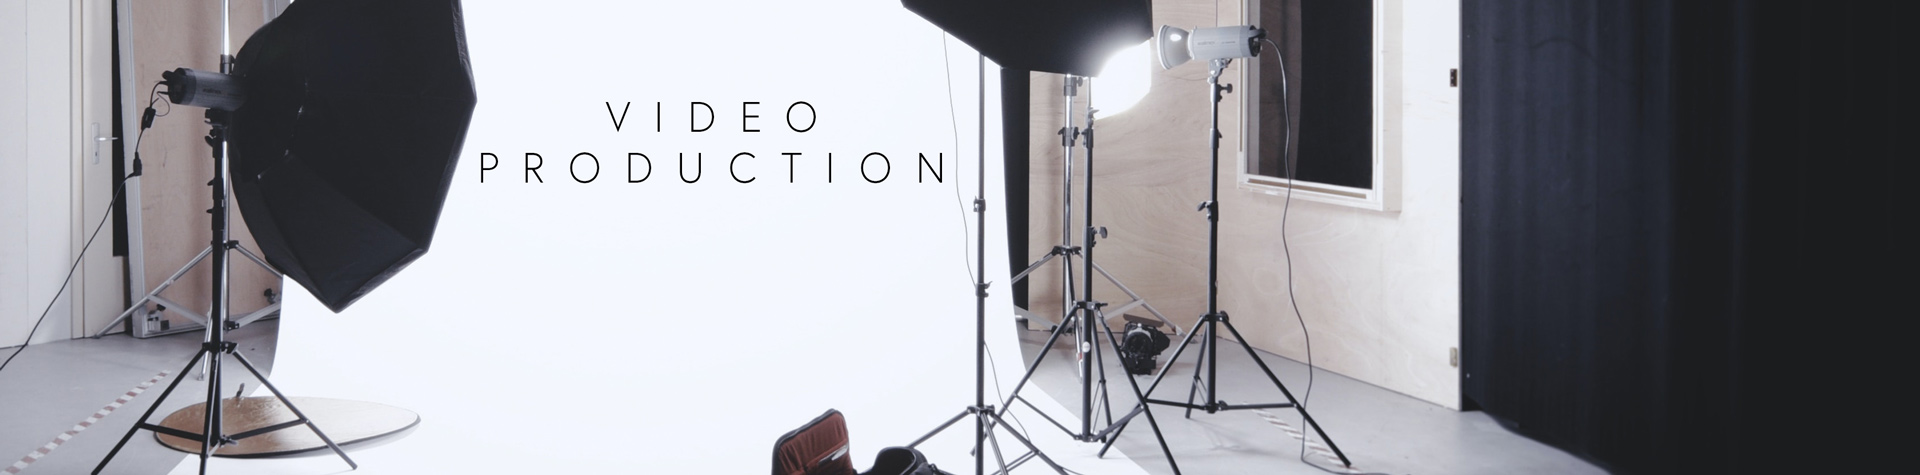 SMD-Video-Production-Banner